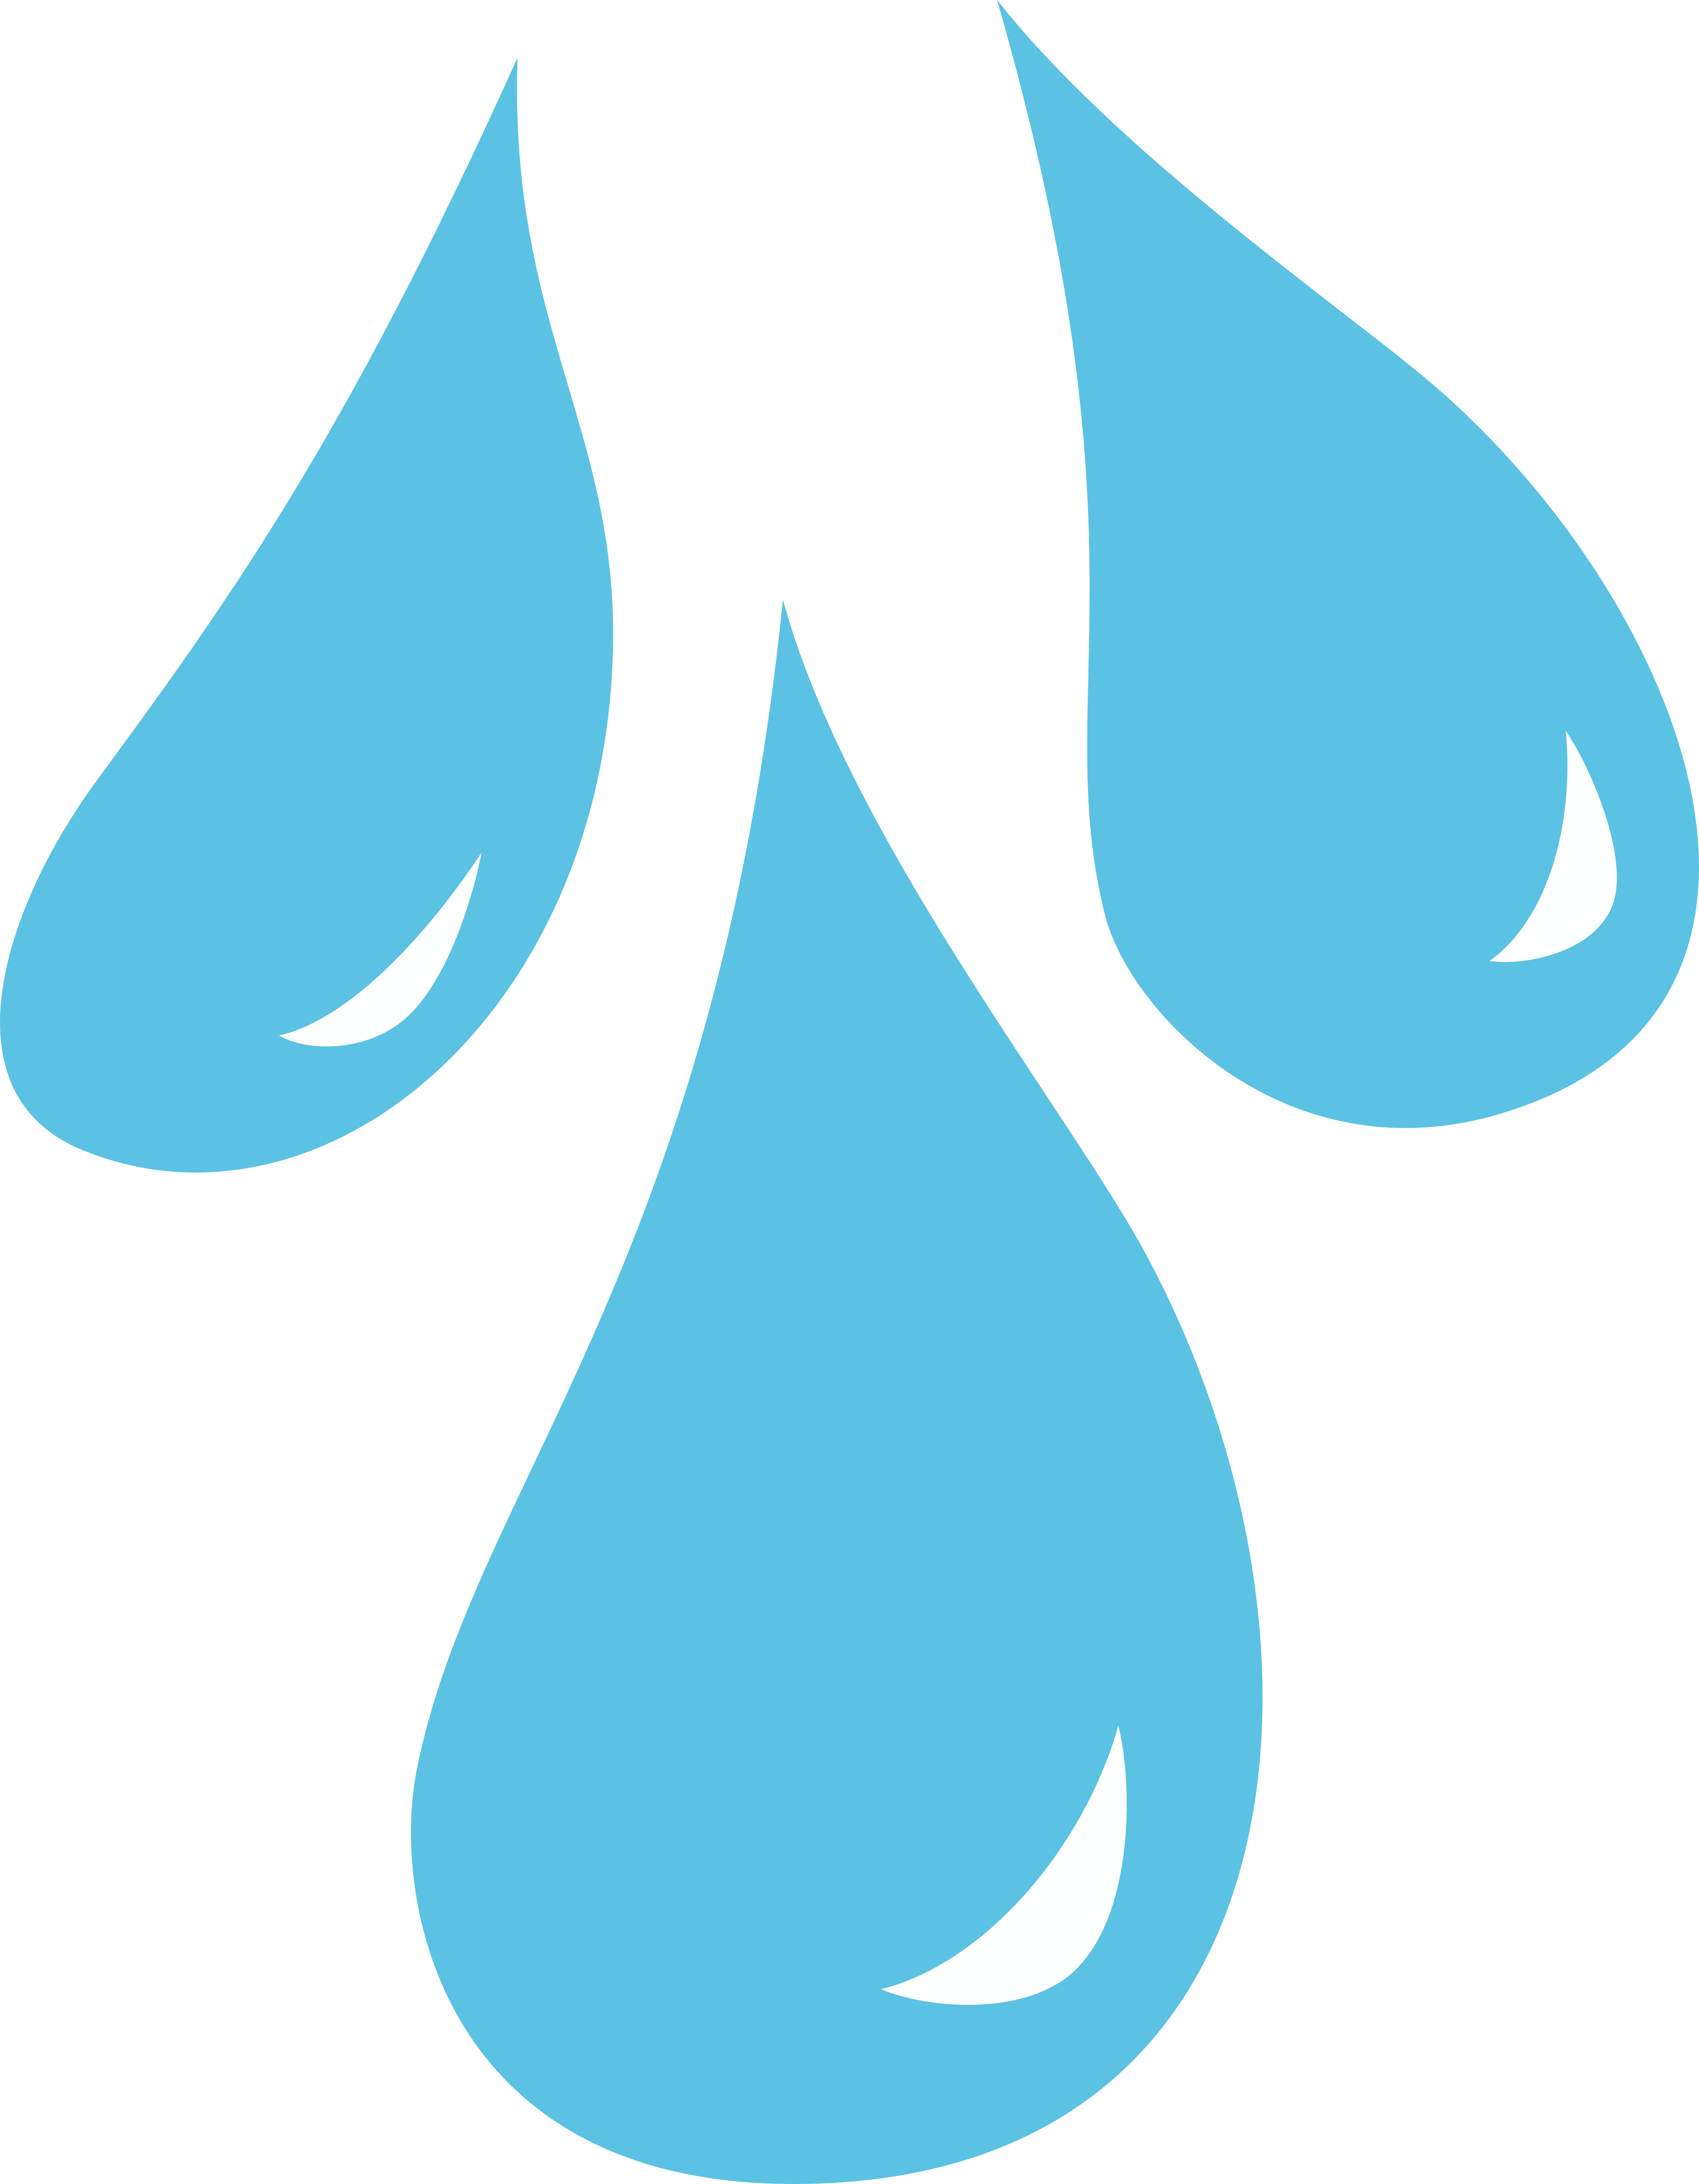 Water drop black and. Raindrop clipart realistic